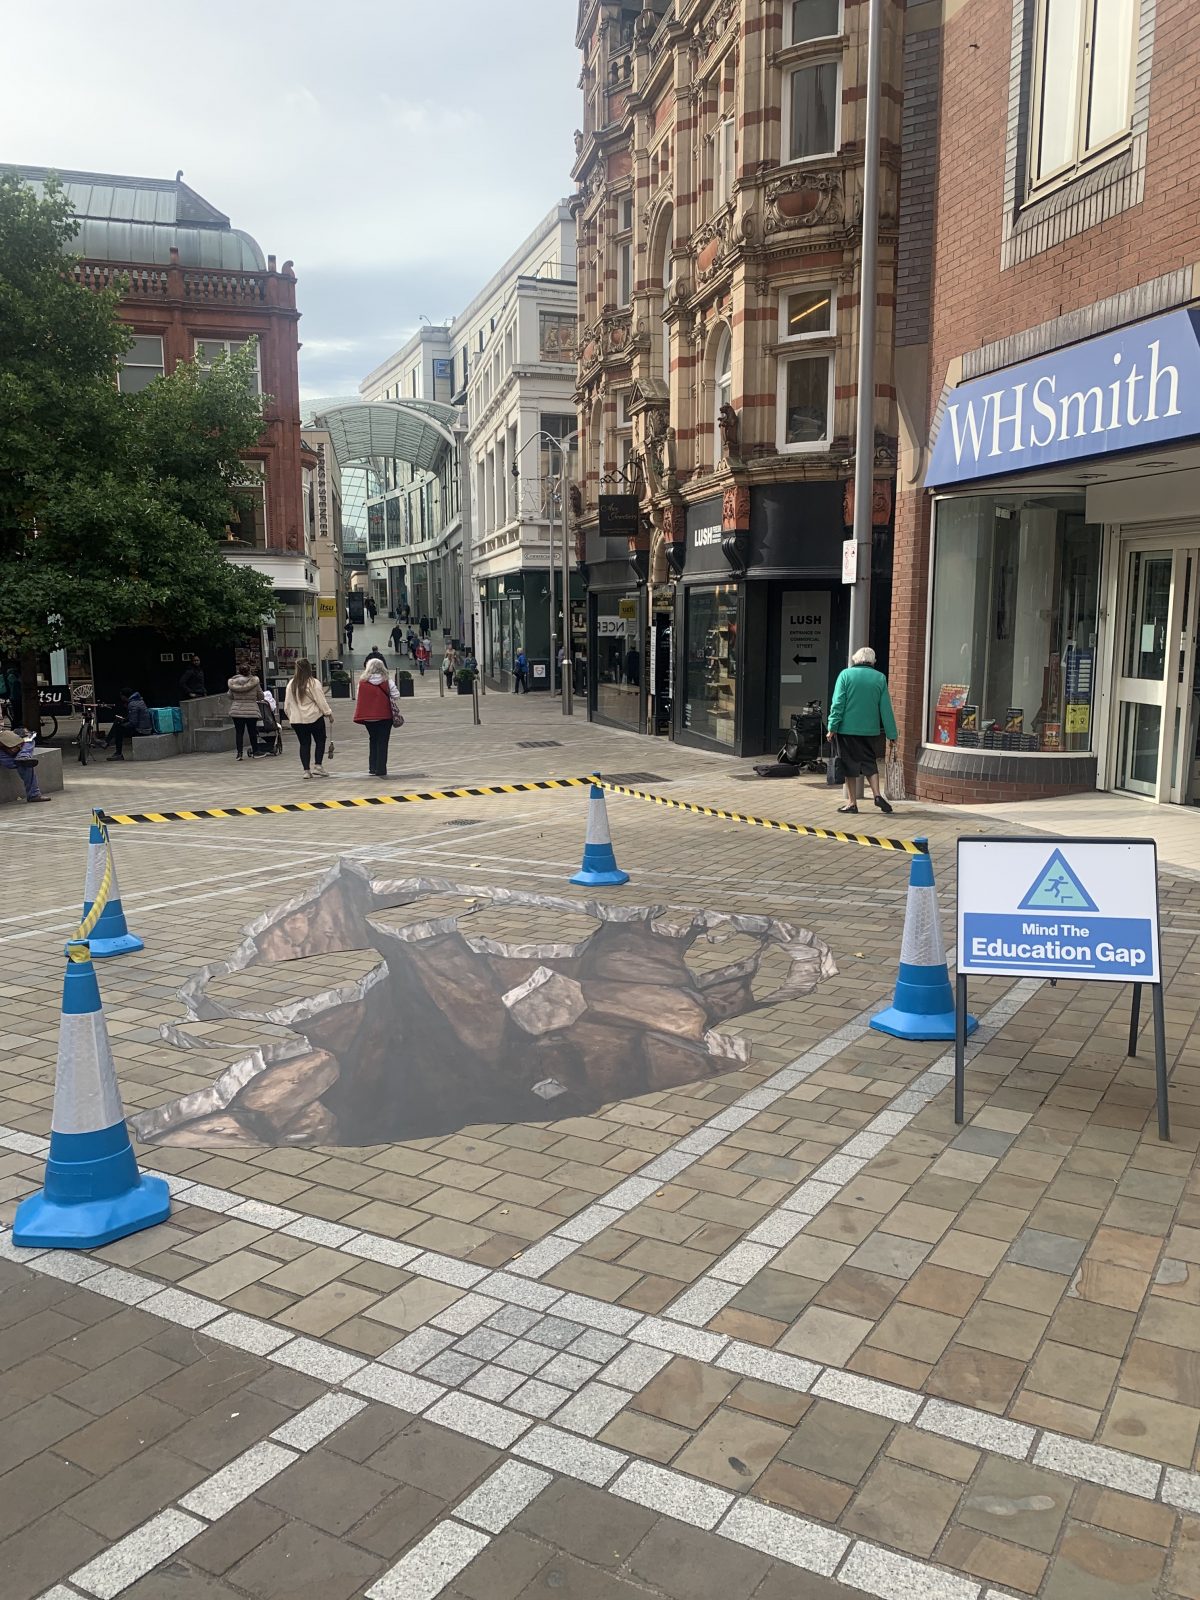 art that makes it look like there's a hole in the ground outside WH Smith.